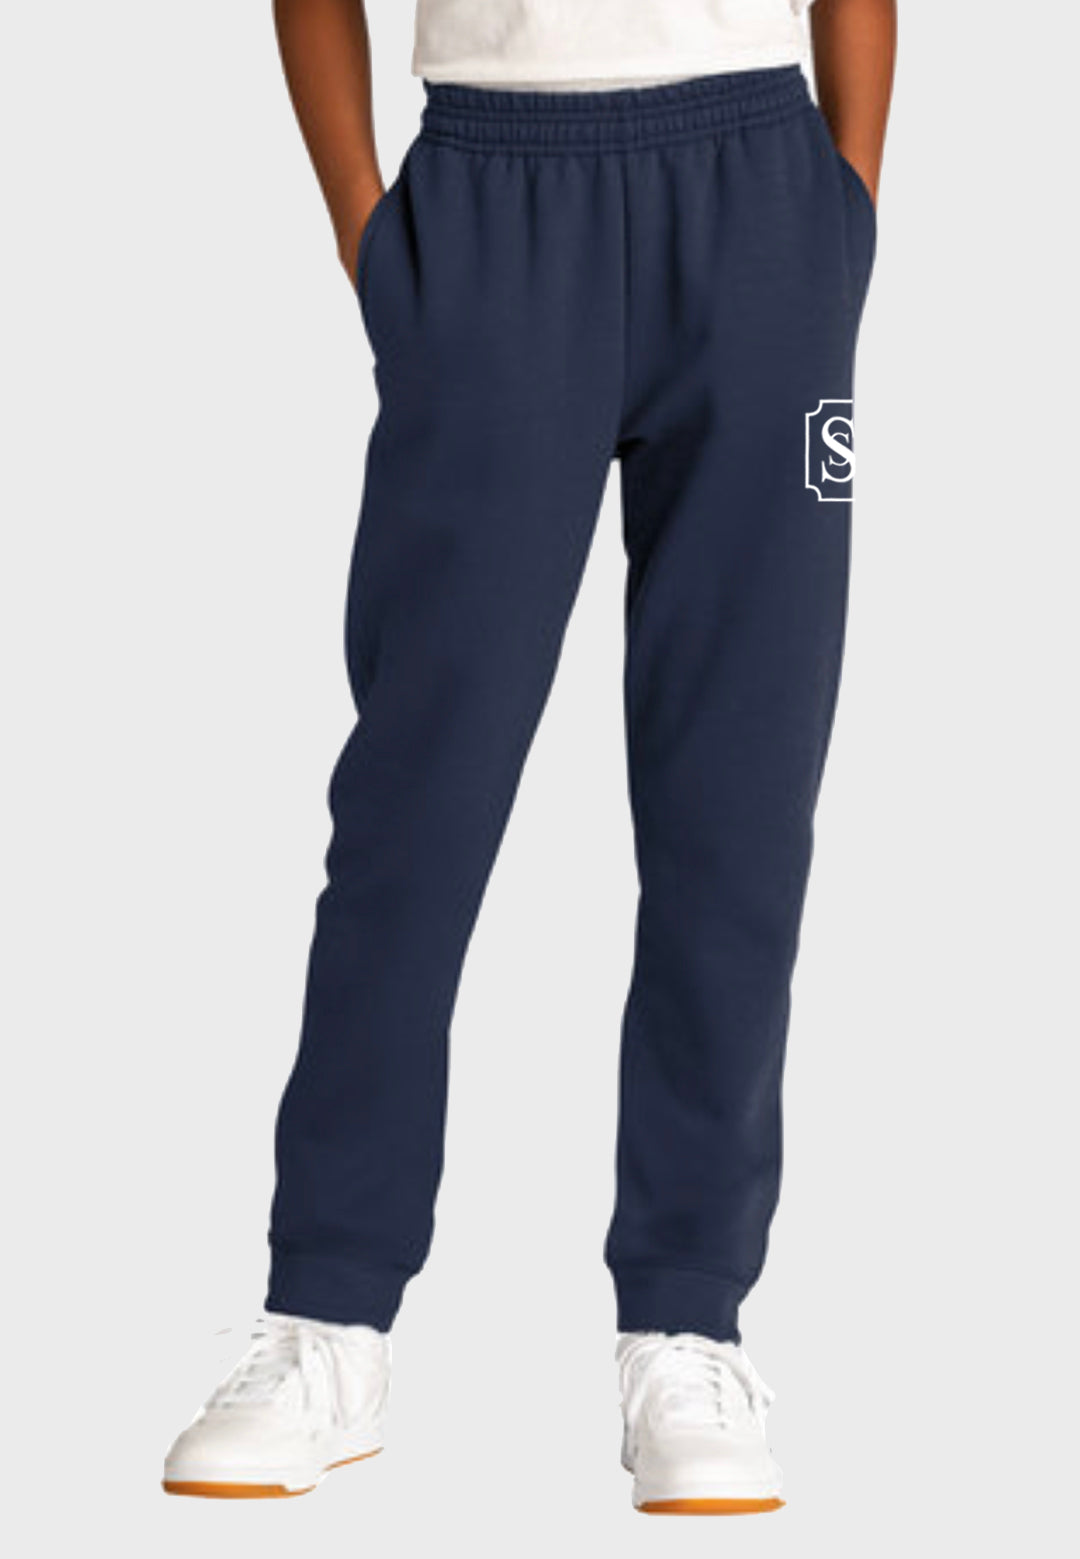 Segars Stables Port & Company ® Youth Core Fleece Jogger - 2 Color Options